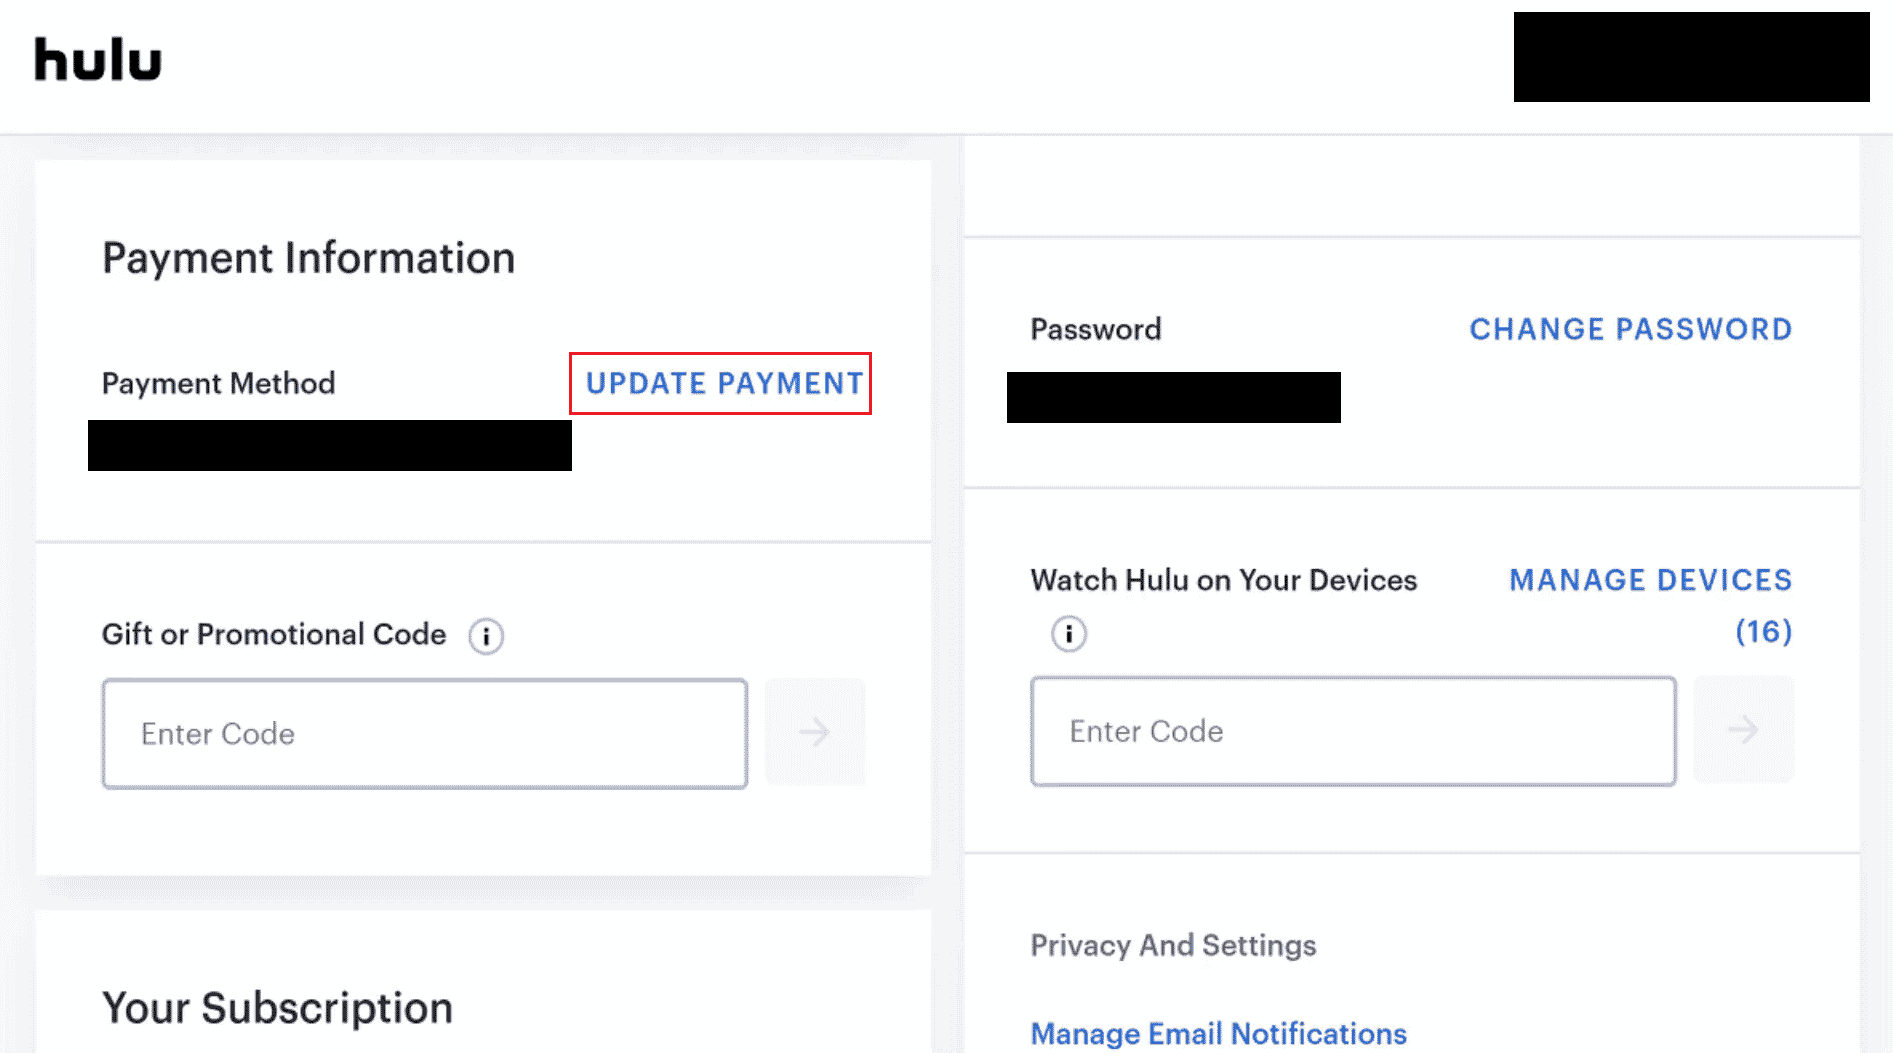 Click on UPDATE PAYMENT next to Payment Method